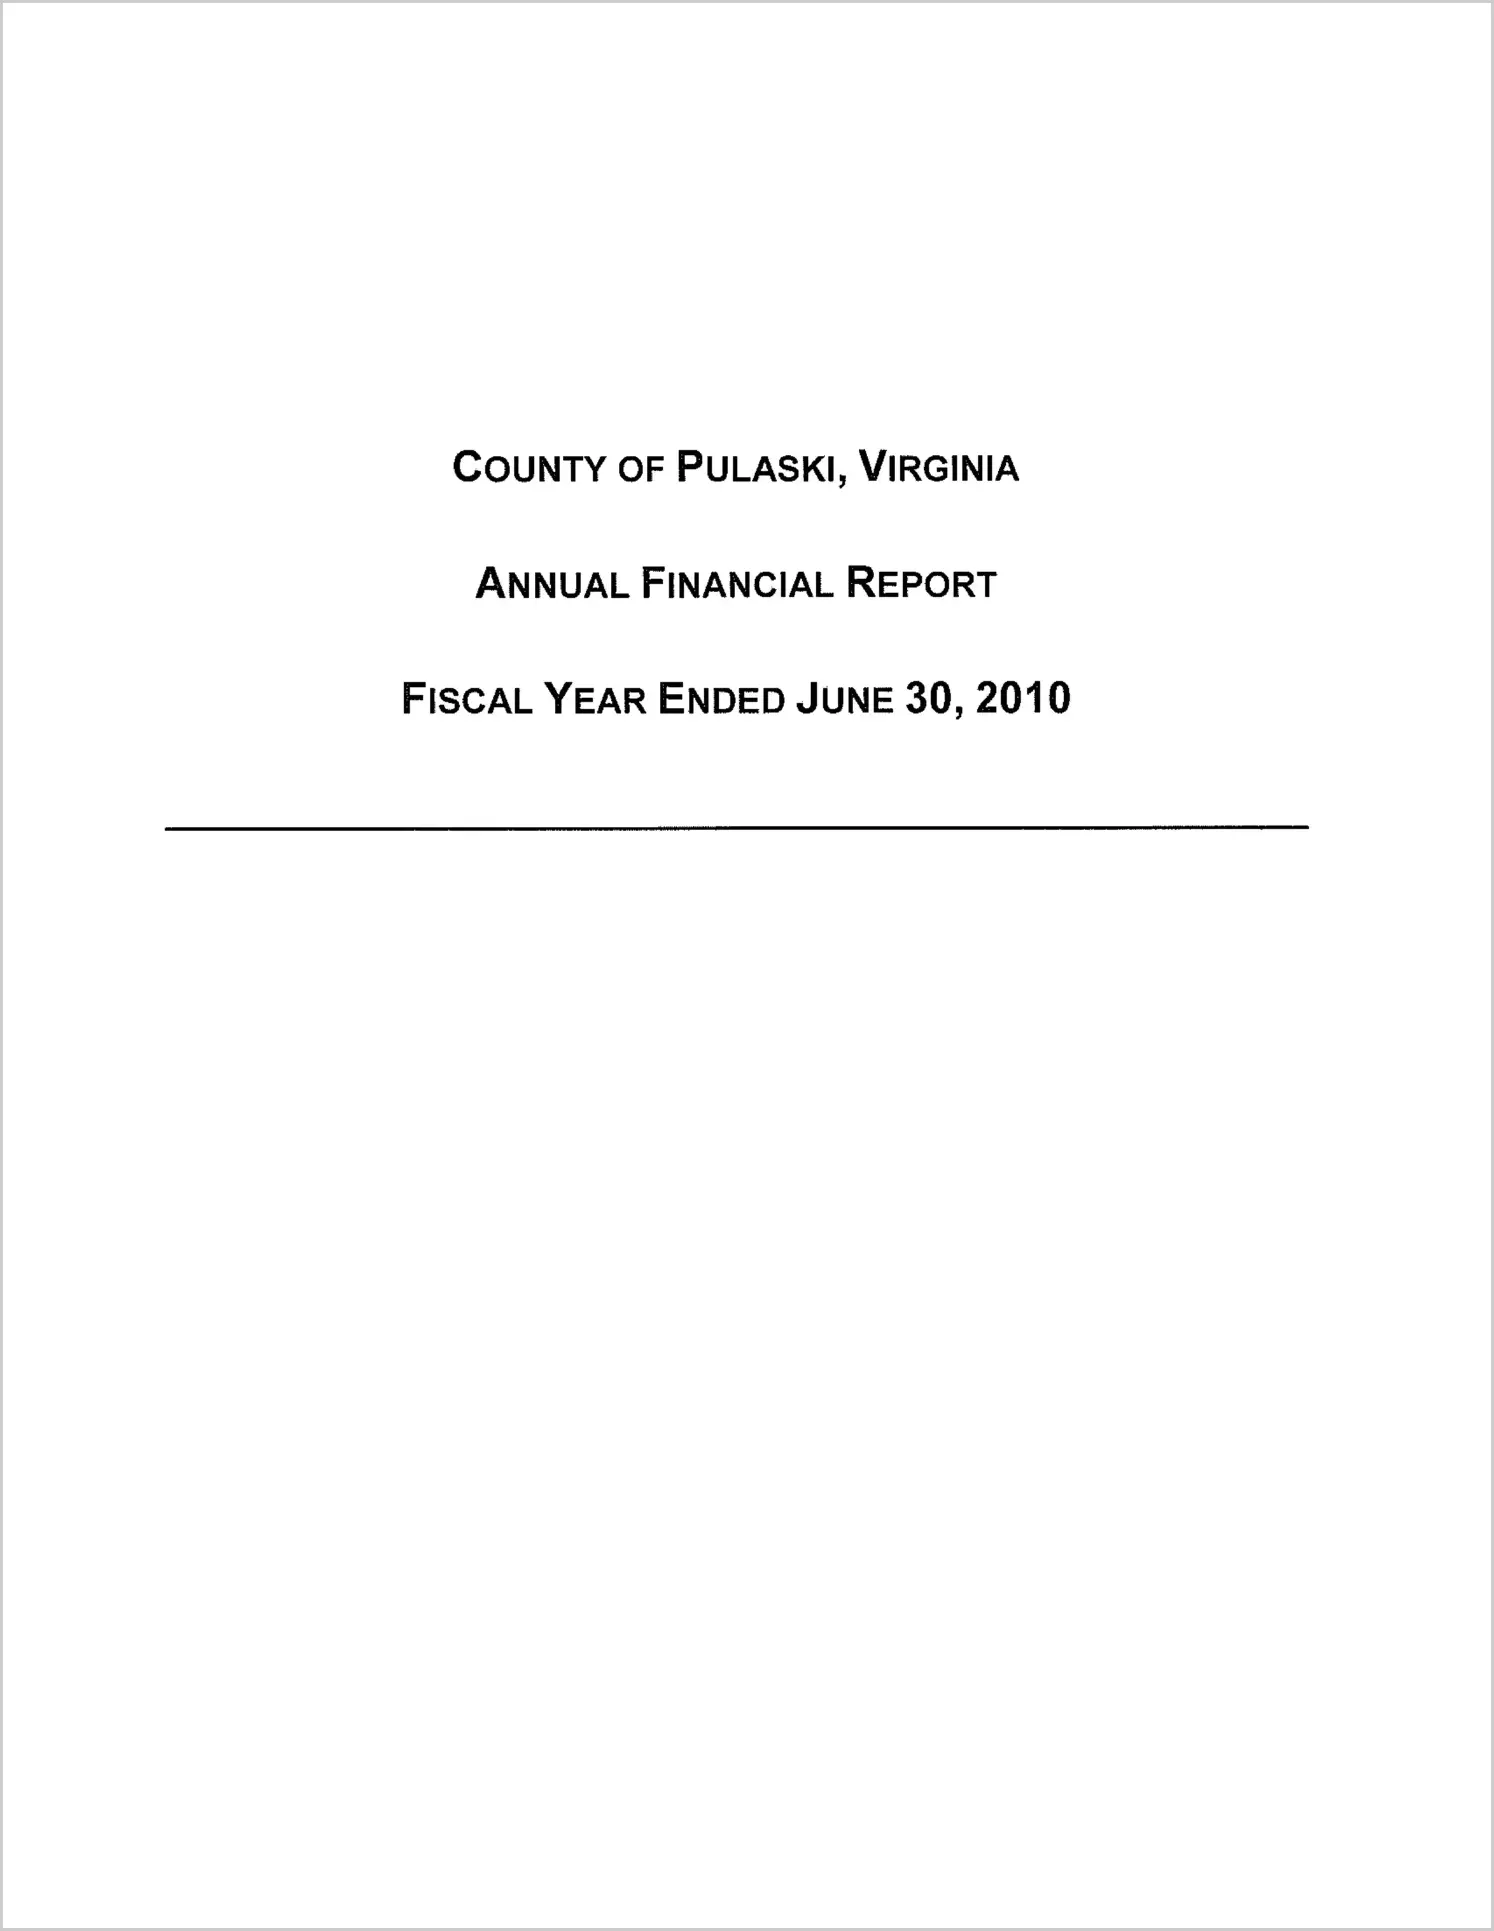 2010 Annual Financial Report for County of Pulaski